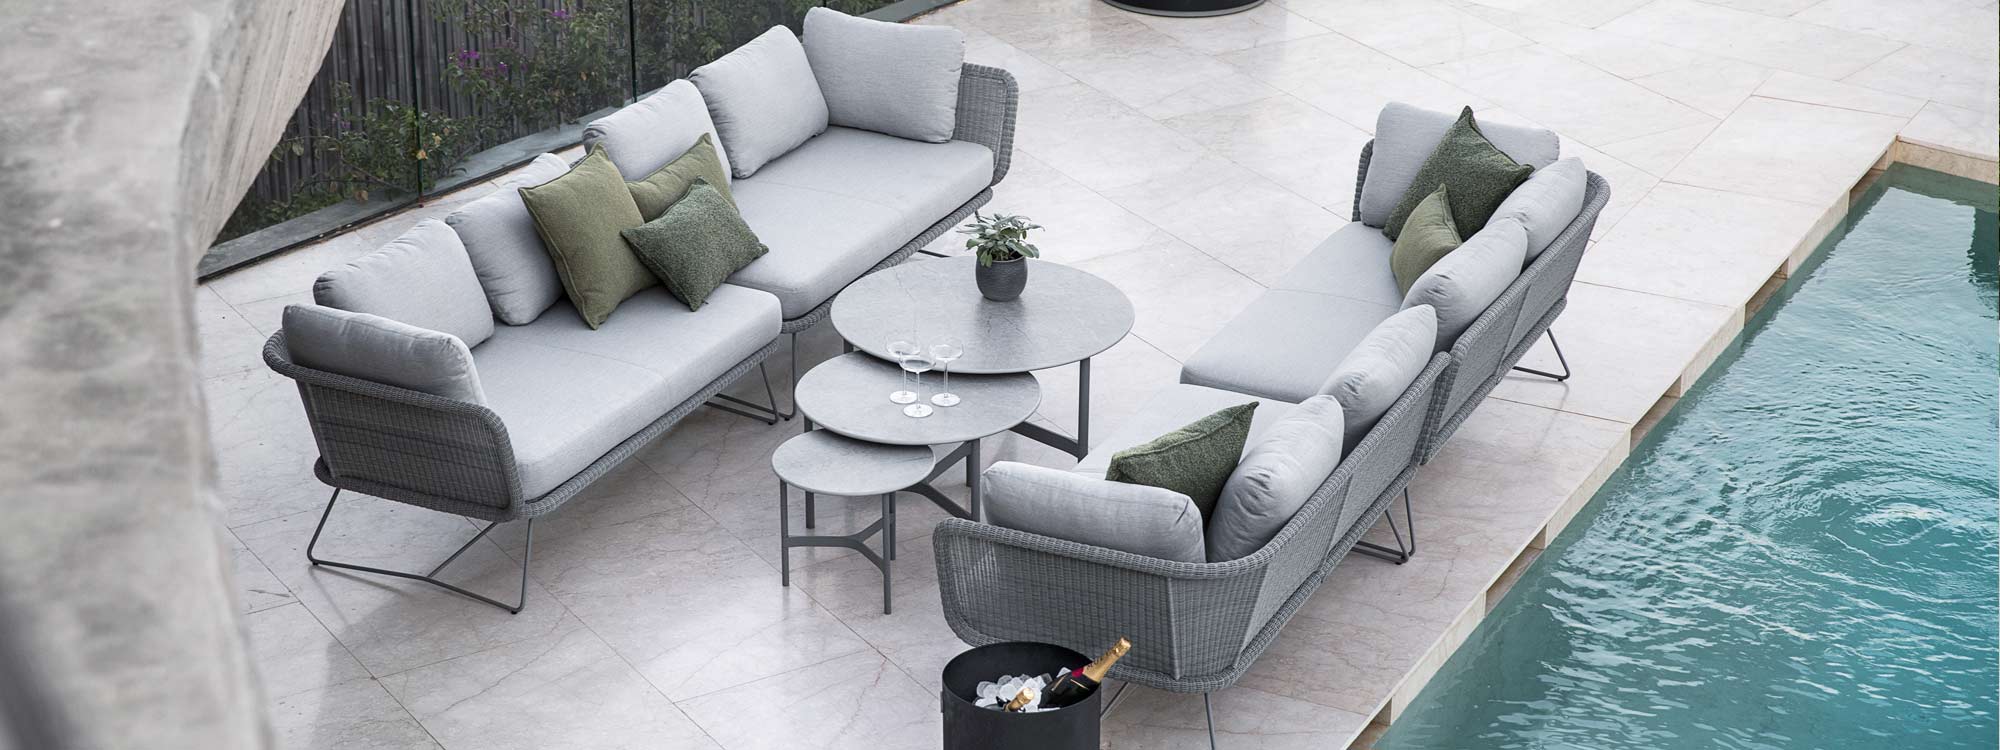 Image of pair of Caneline Horizon garden sofas in grey weave and grey cushions, with nest of round Twist tables in the middle